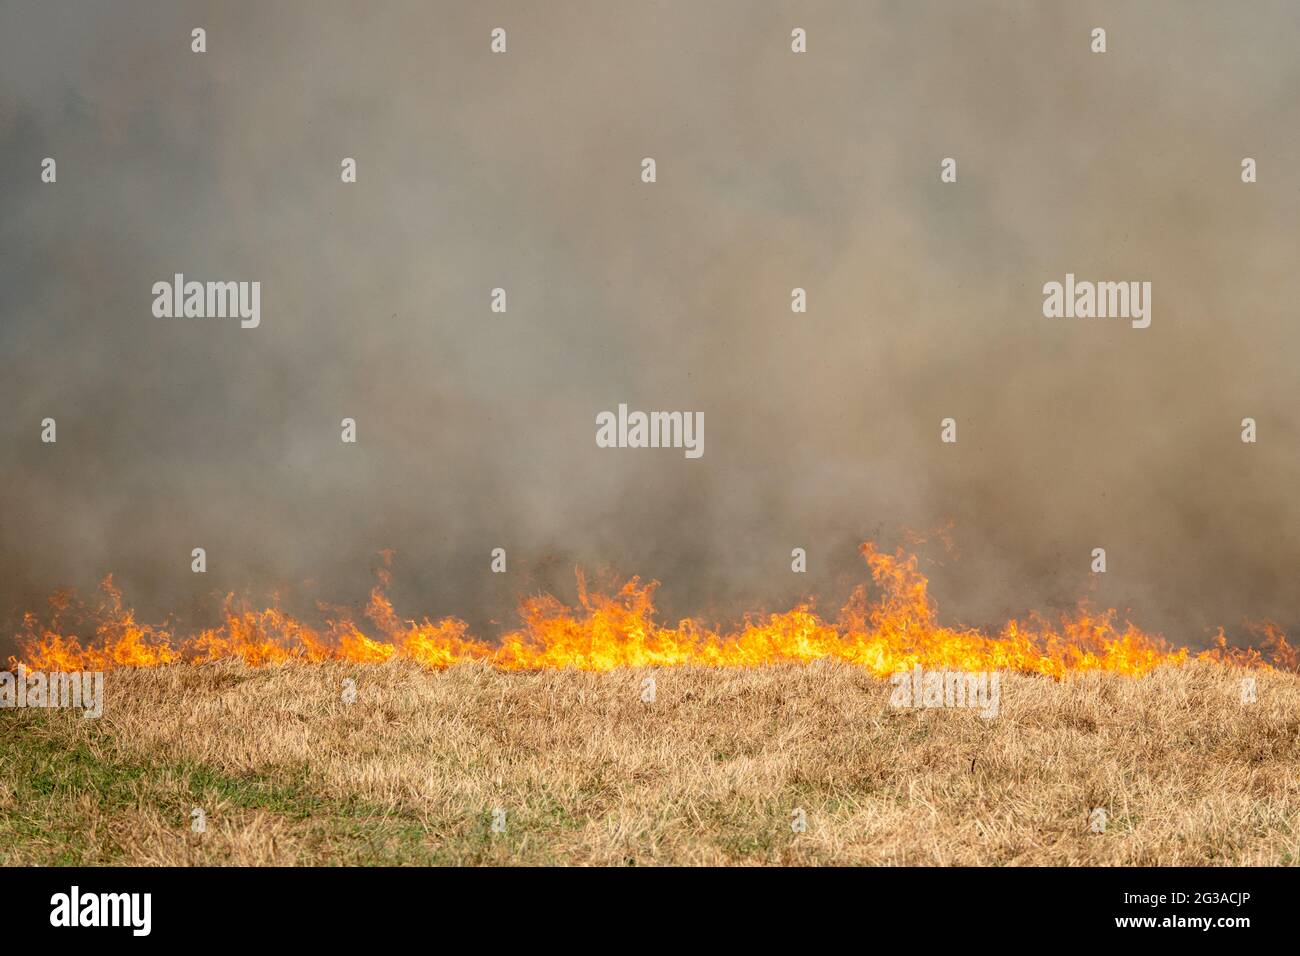 Forest fire burning, Wildfire close up Stock Photo